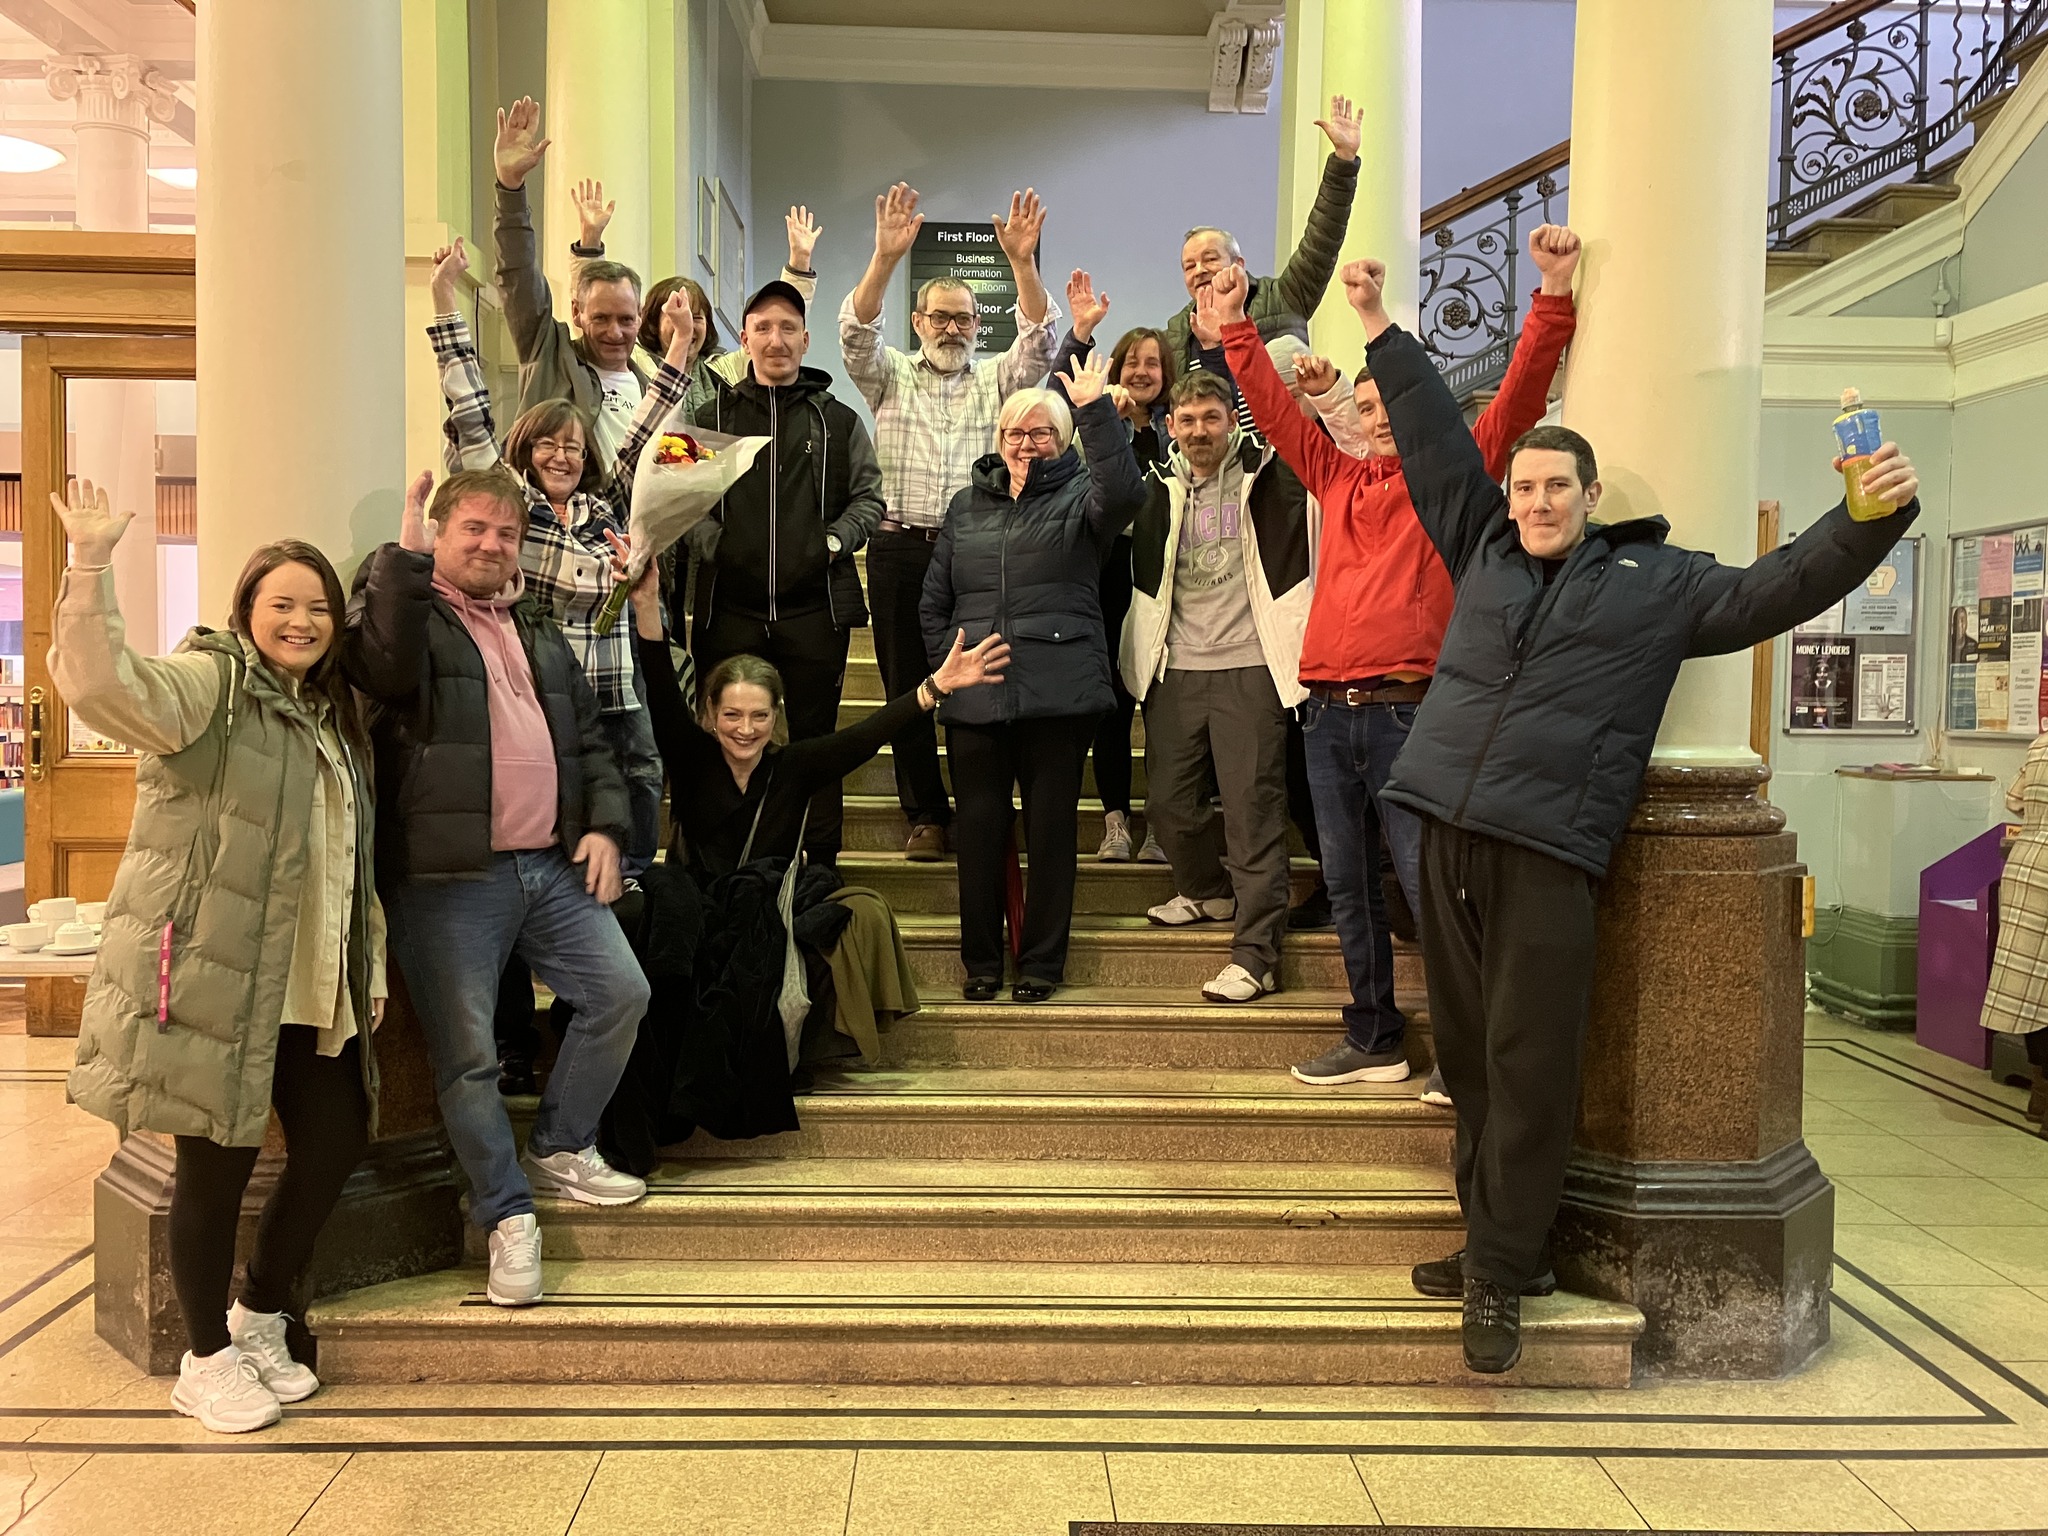 Staff and clients from Carlisle House Substance Use Treatment Centre and Gray’s Court move-on supported living project in Belfast Central Library during the launch of the Hope Exhibition